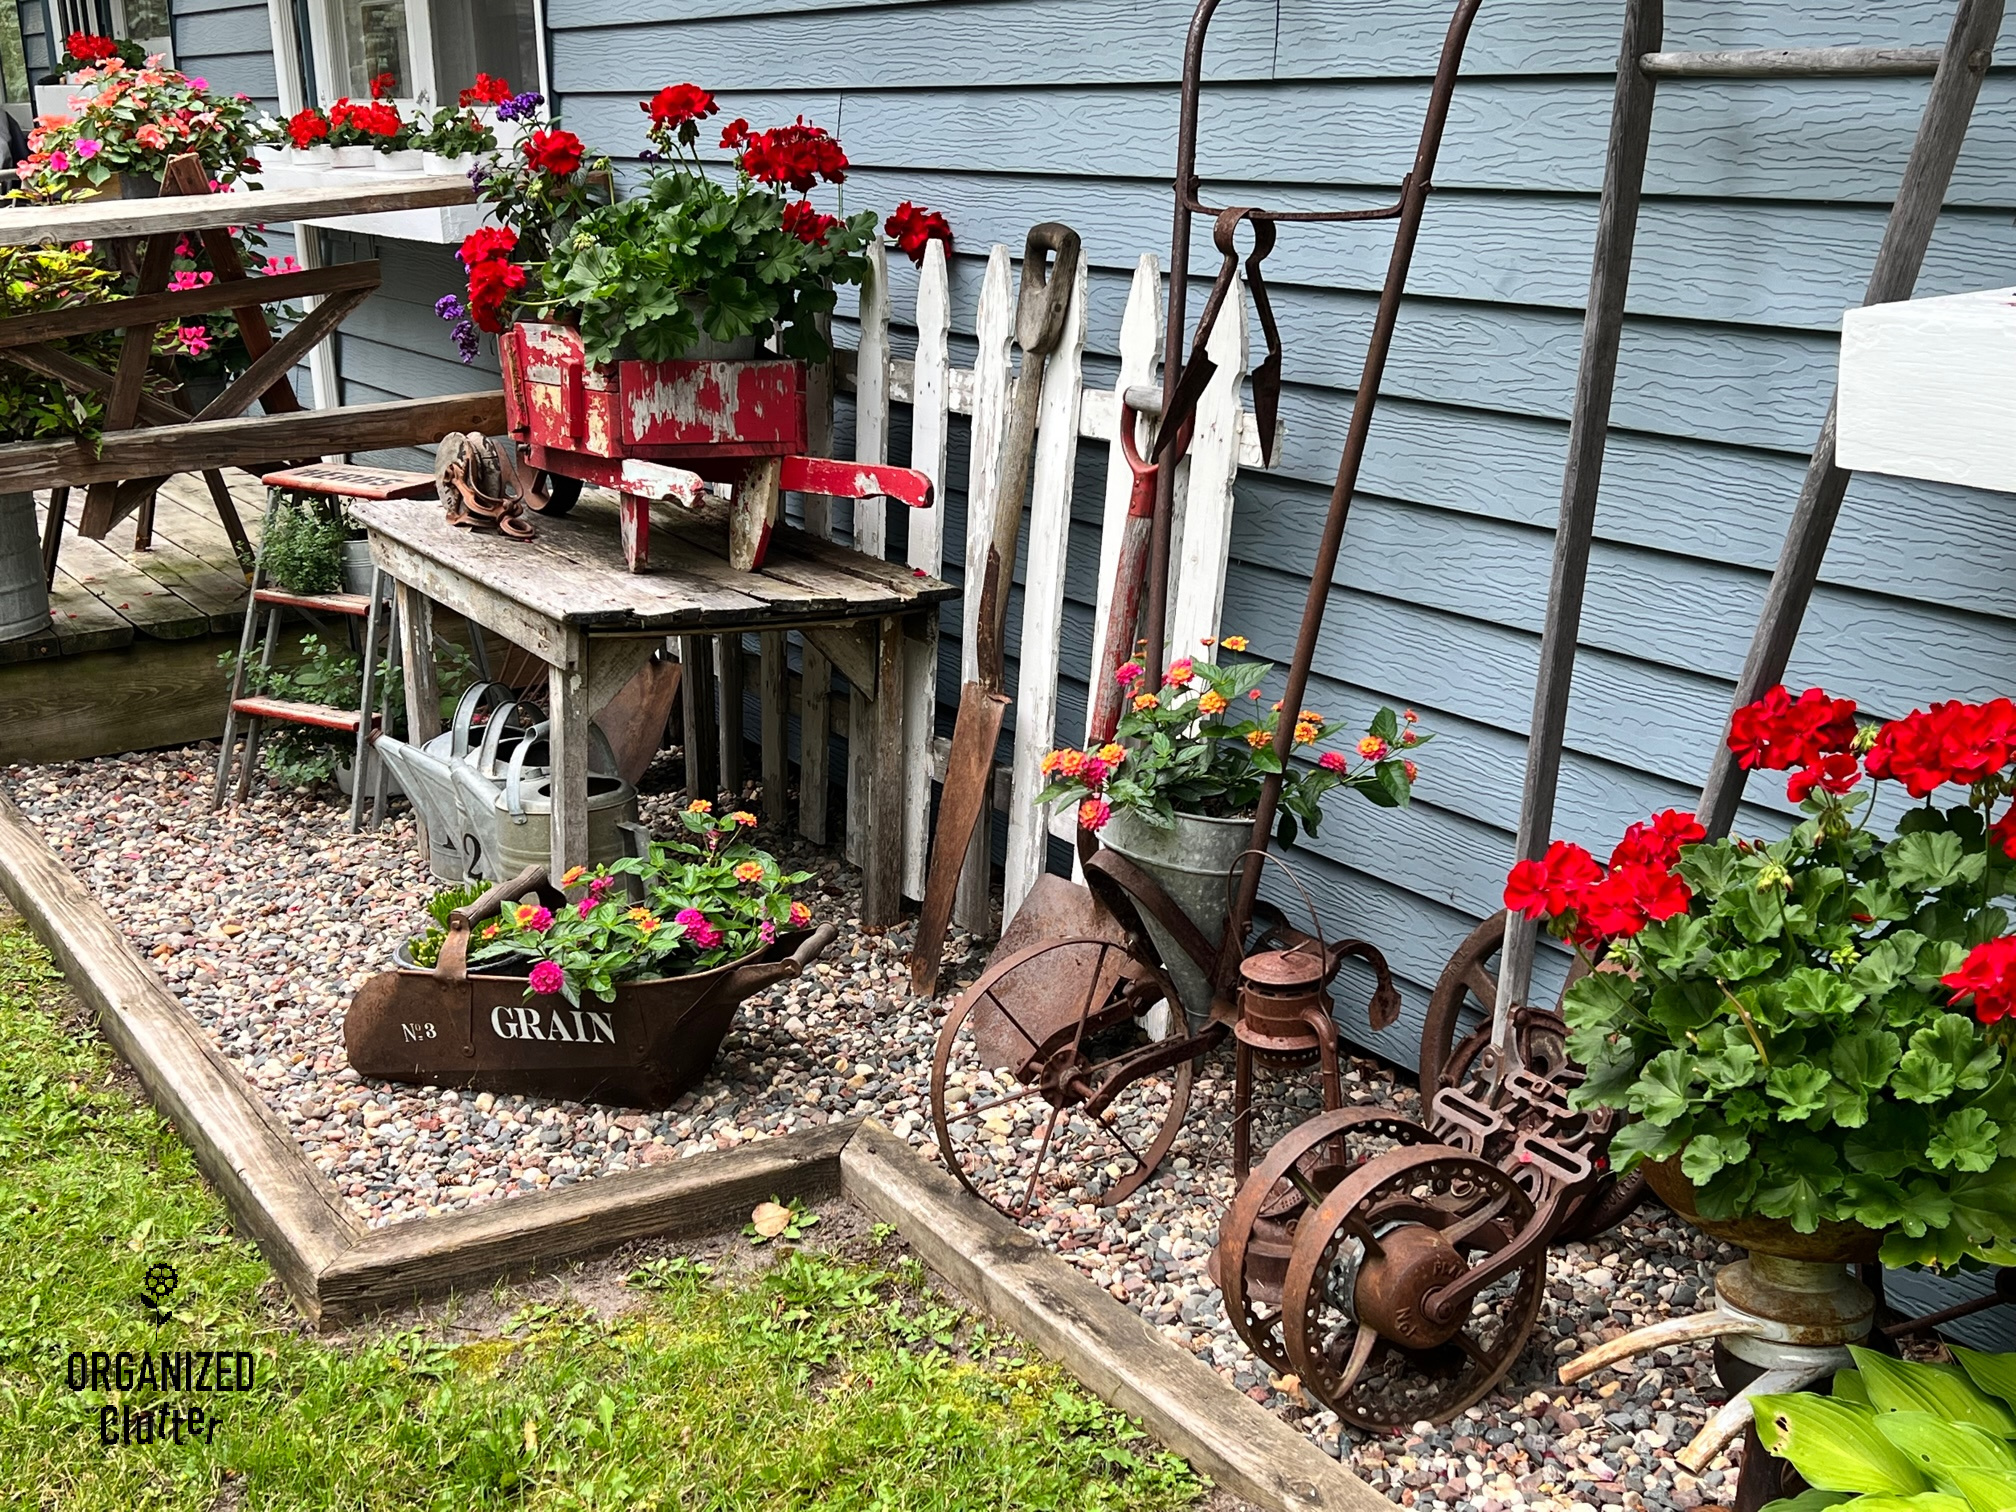 Decorating the Yard & Garden with Vintage Milk Cans - Organized